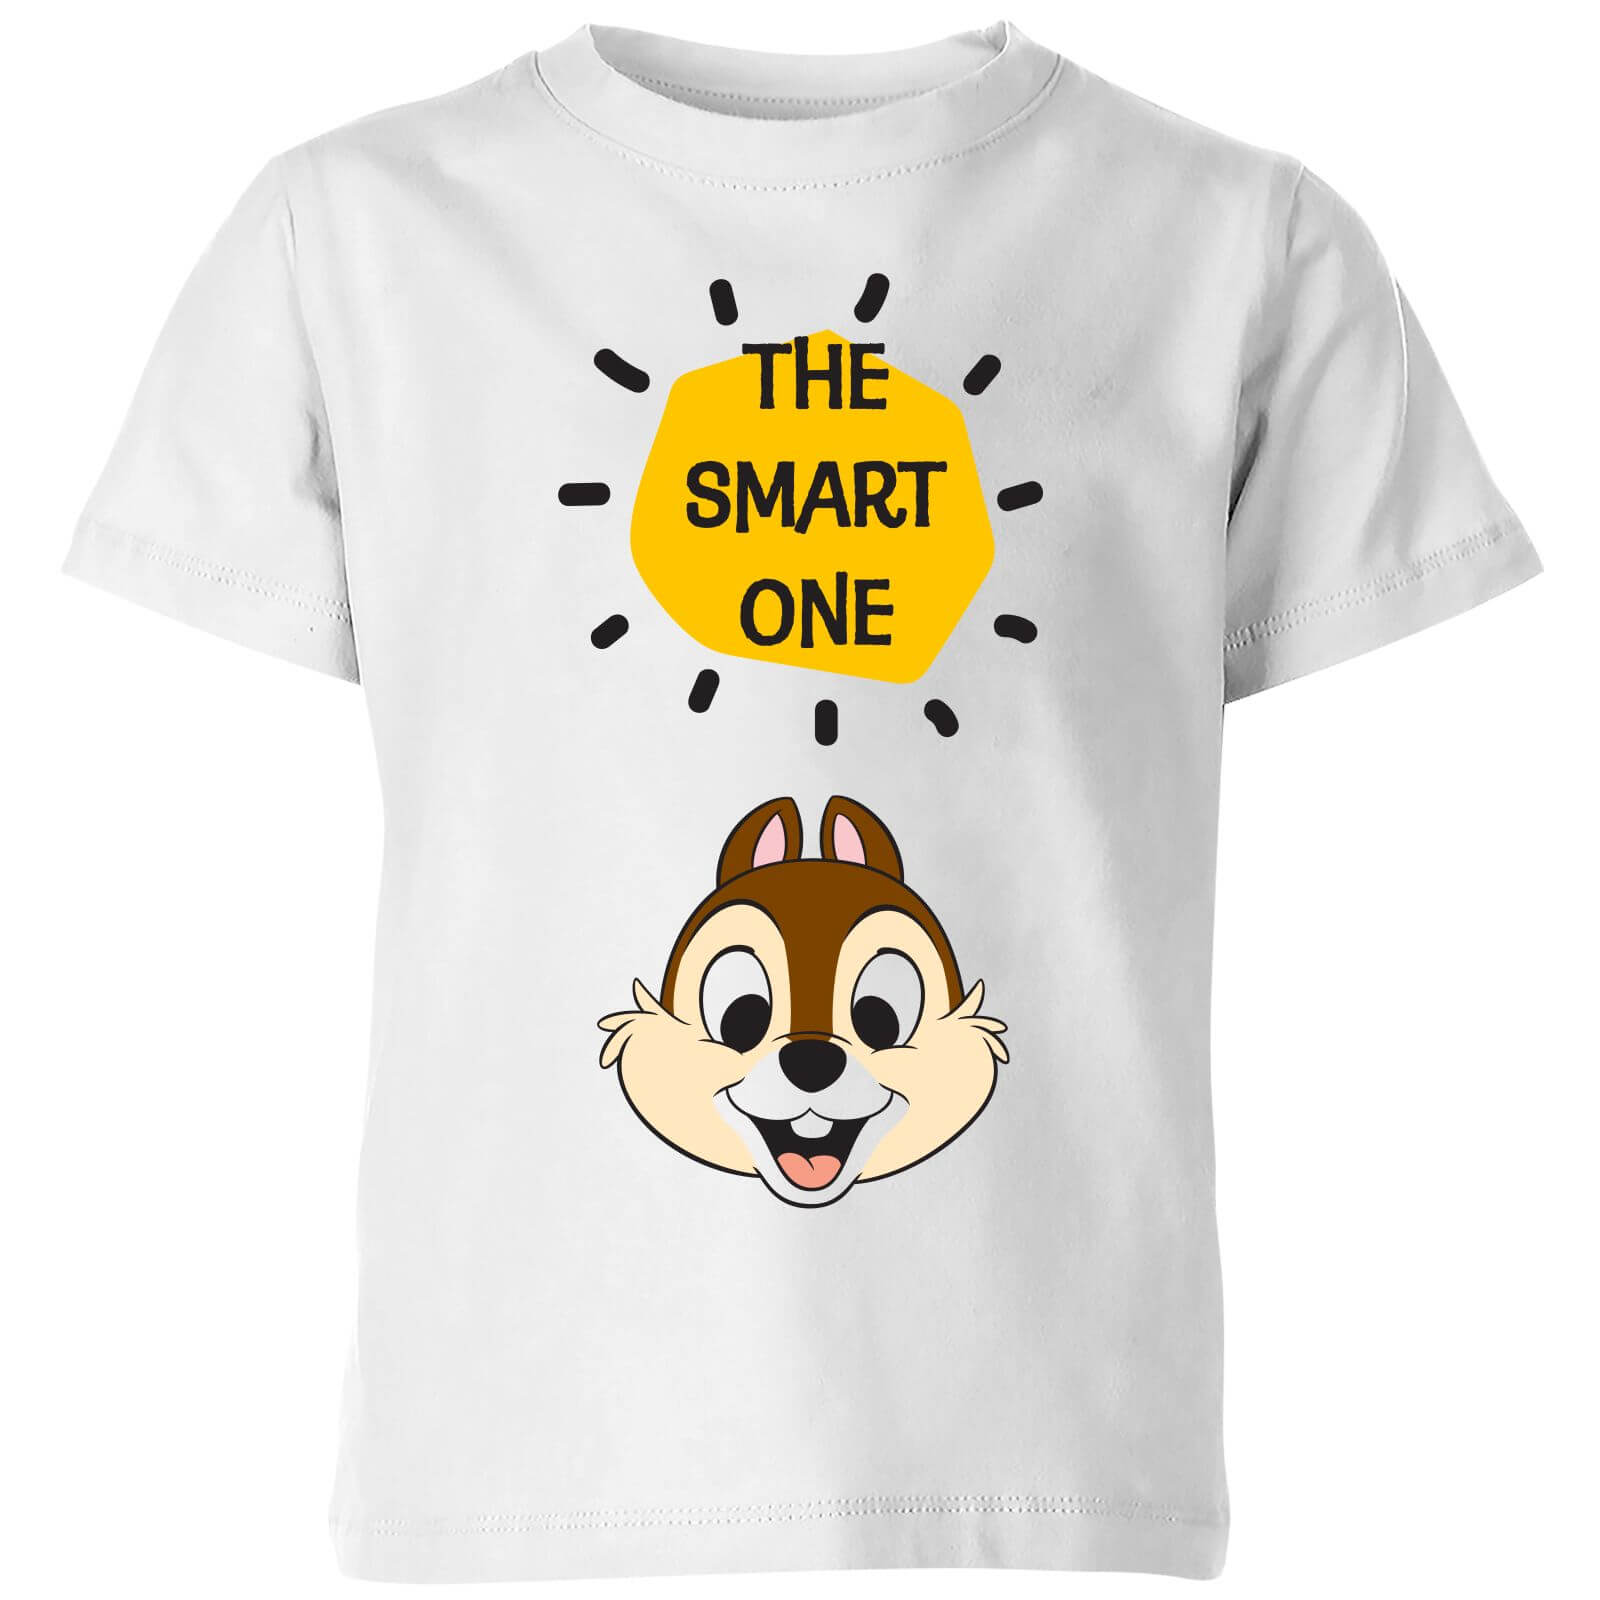 Disney Chip 'N' Dale The Smart One Kids' T-Shirt - White - 5-6 Years